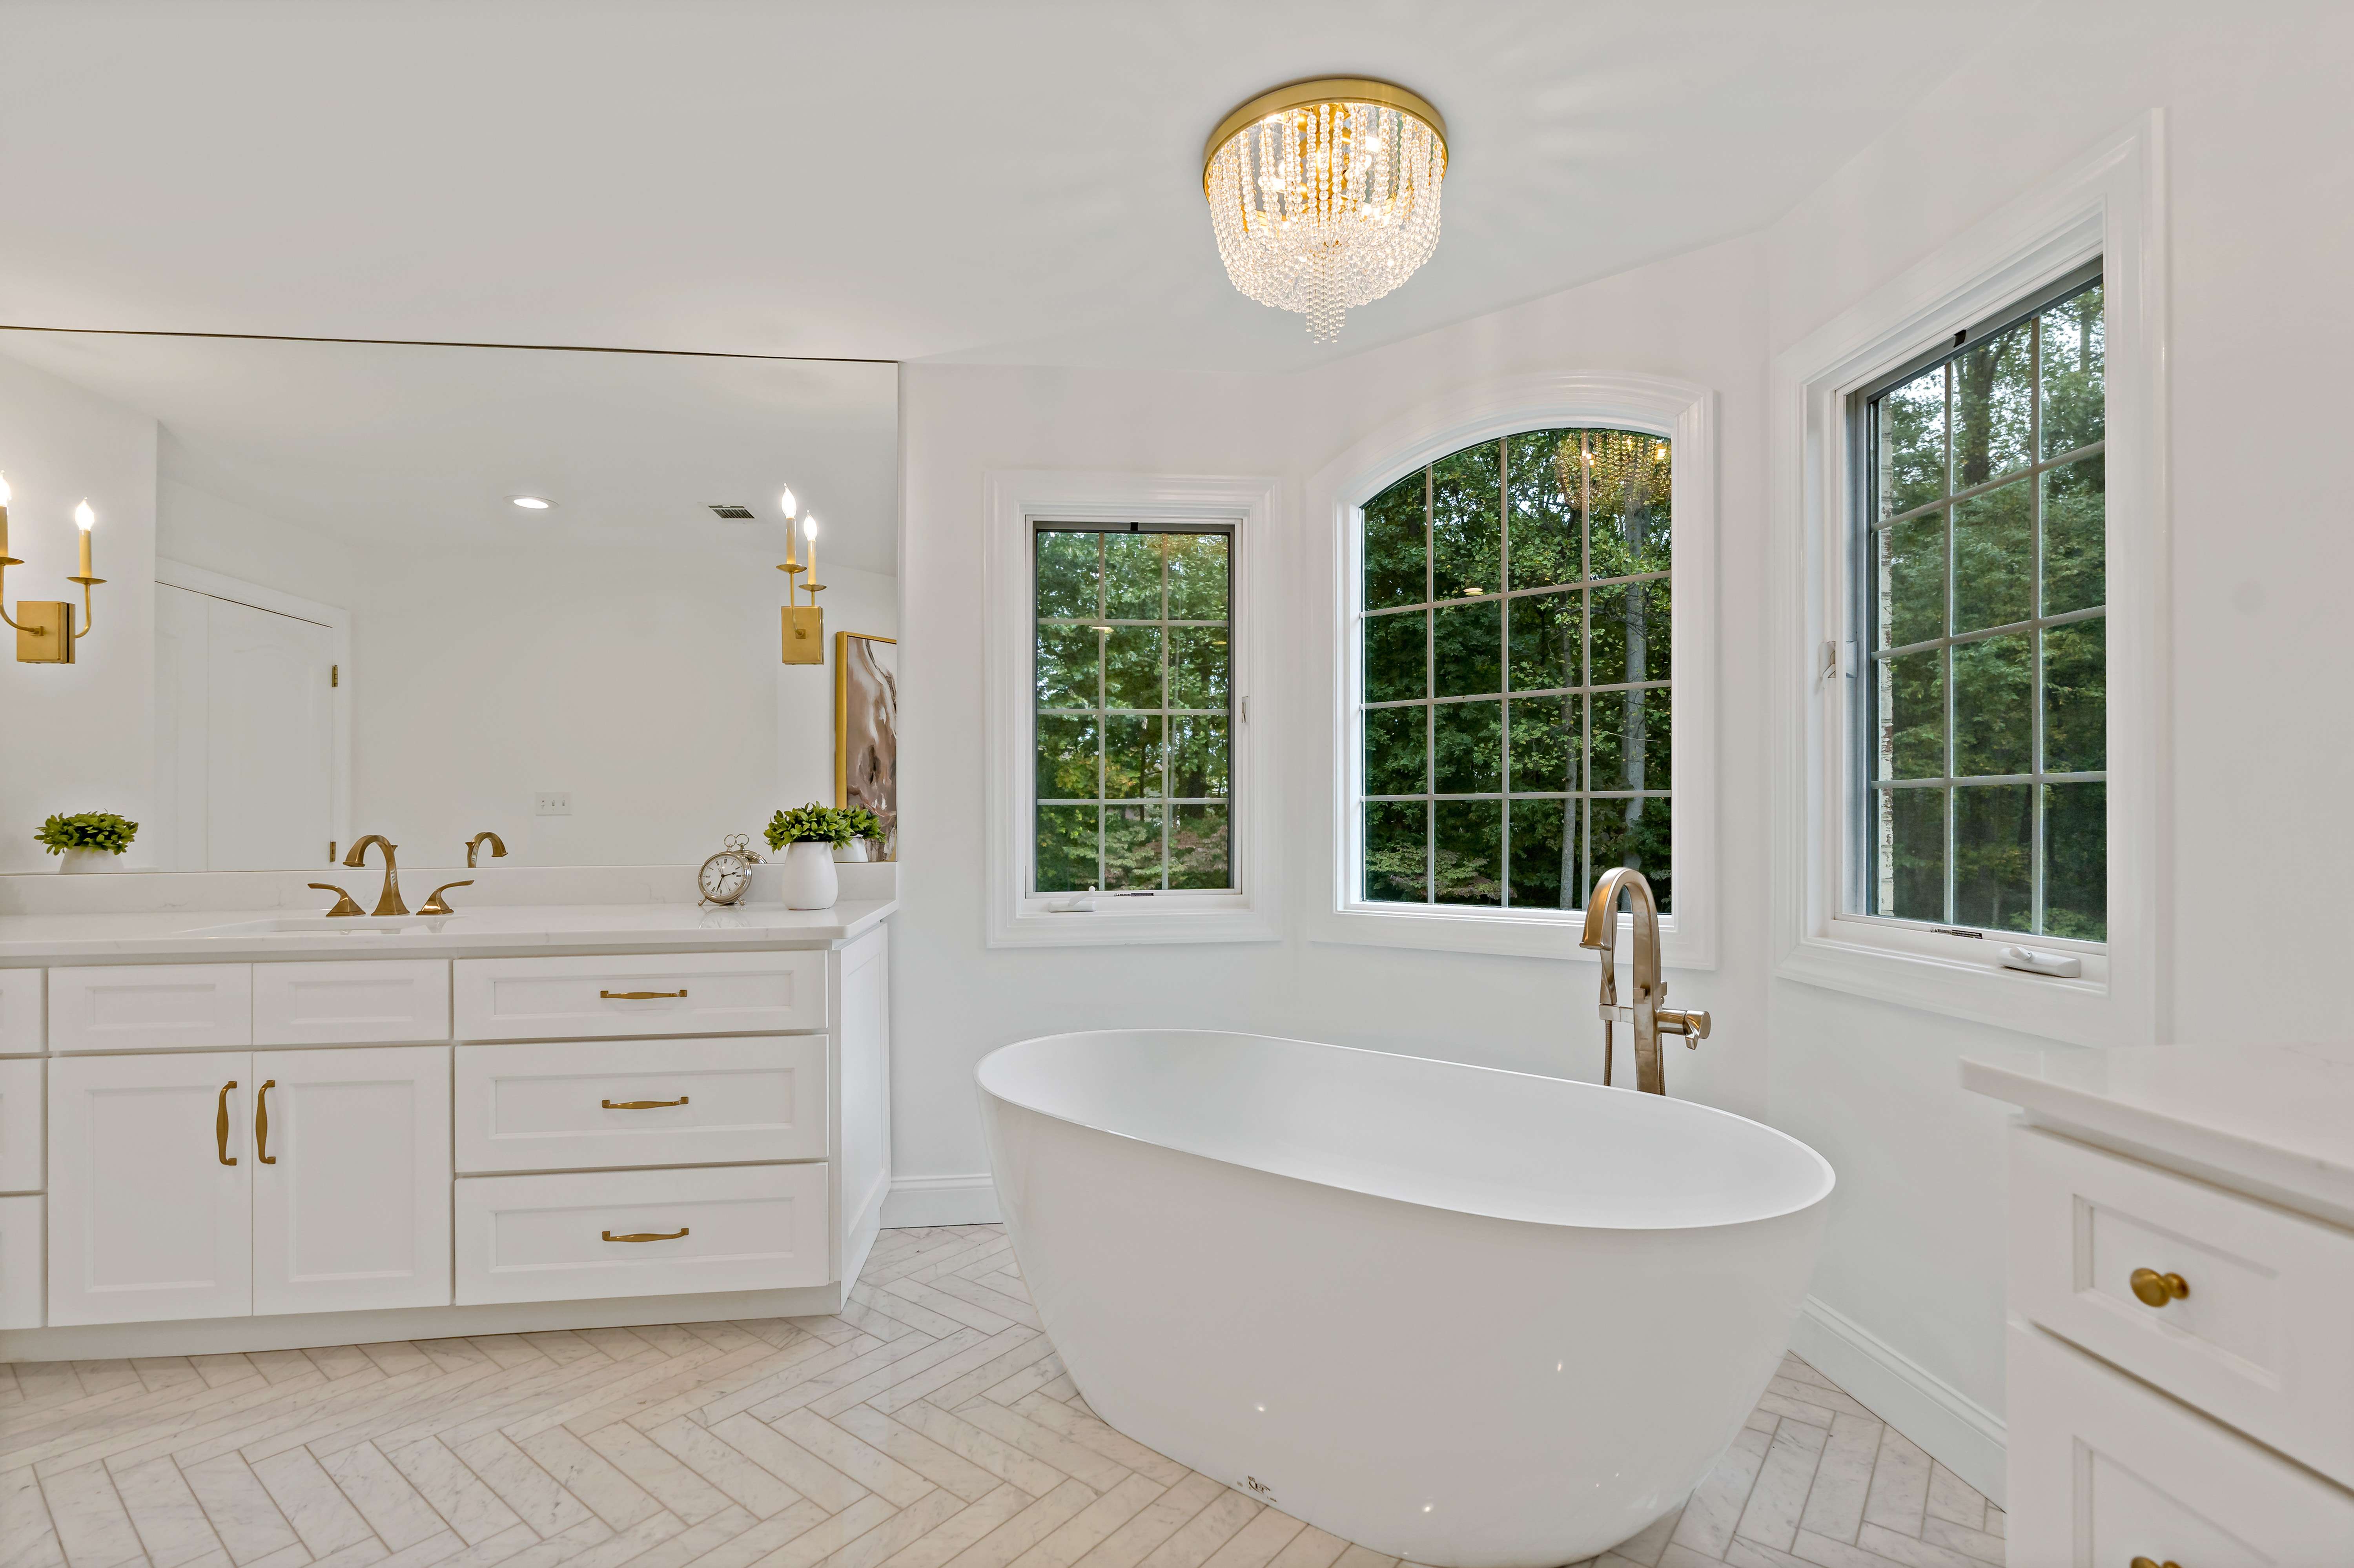 White Marble Tiled Niches Filled with Candles Over Tub - Transitional -  Bathroom